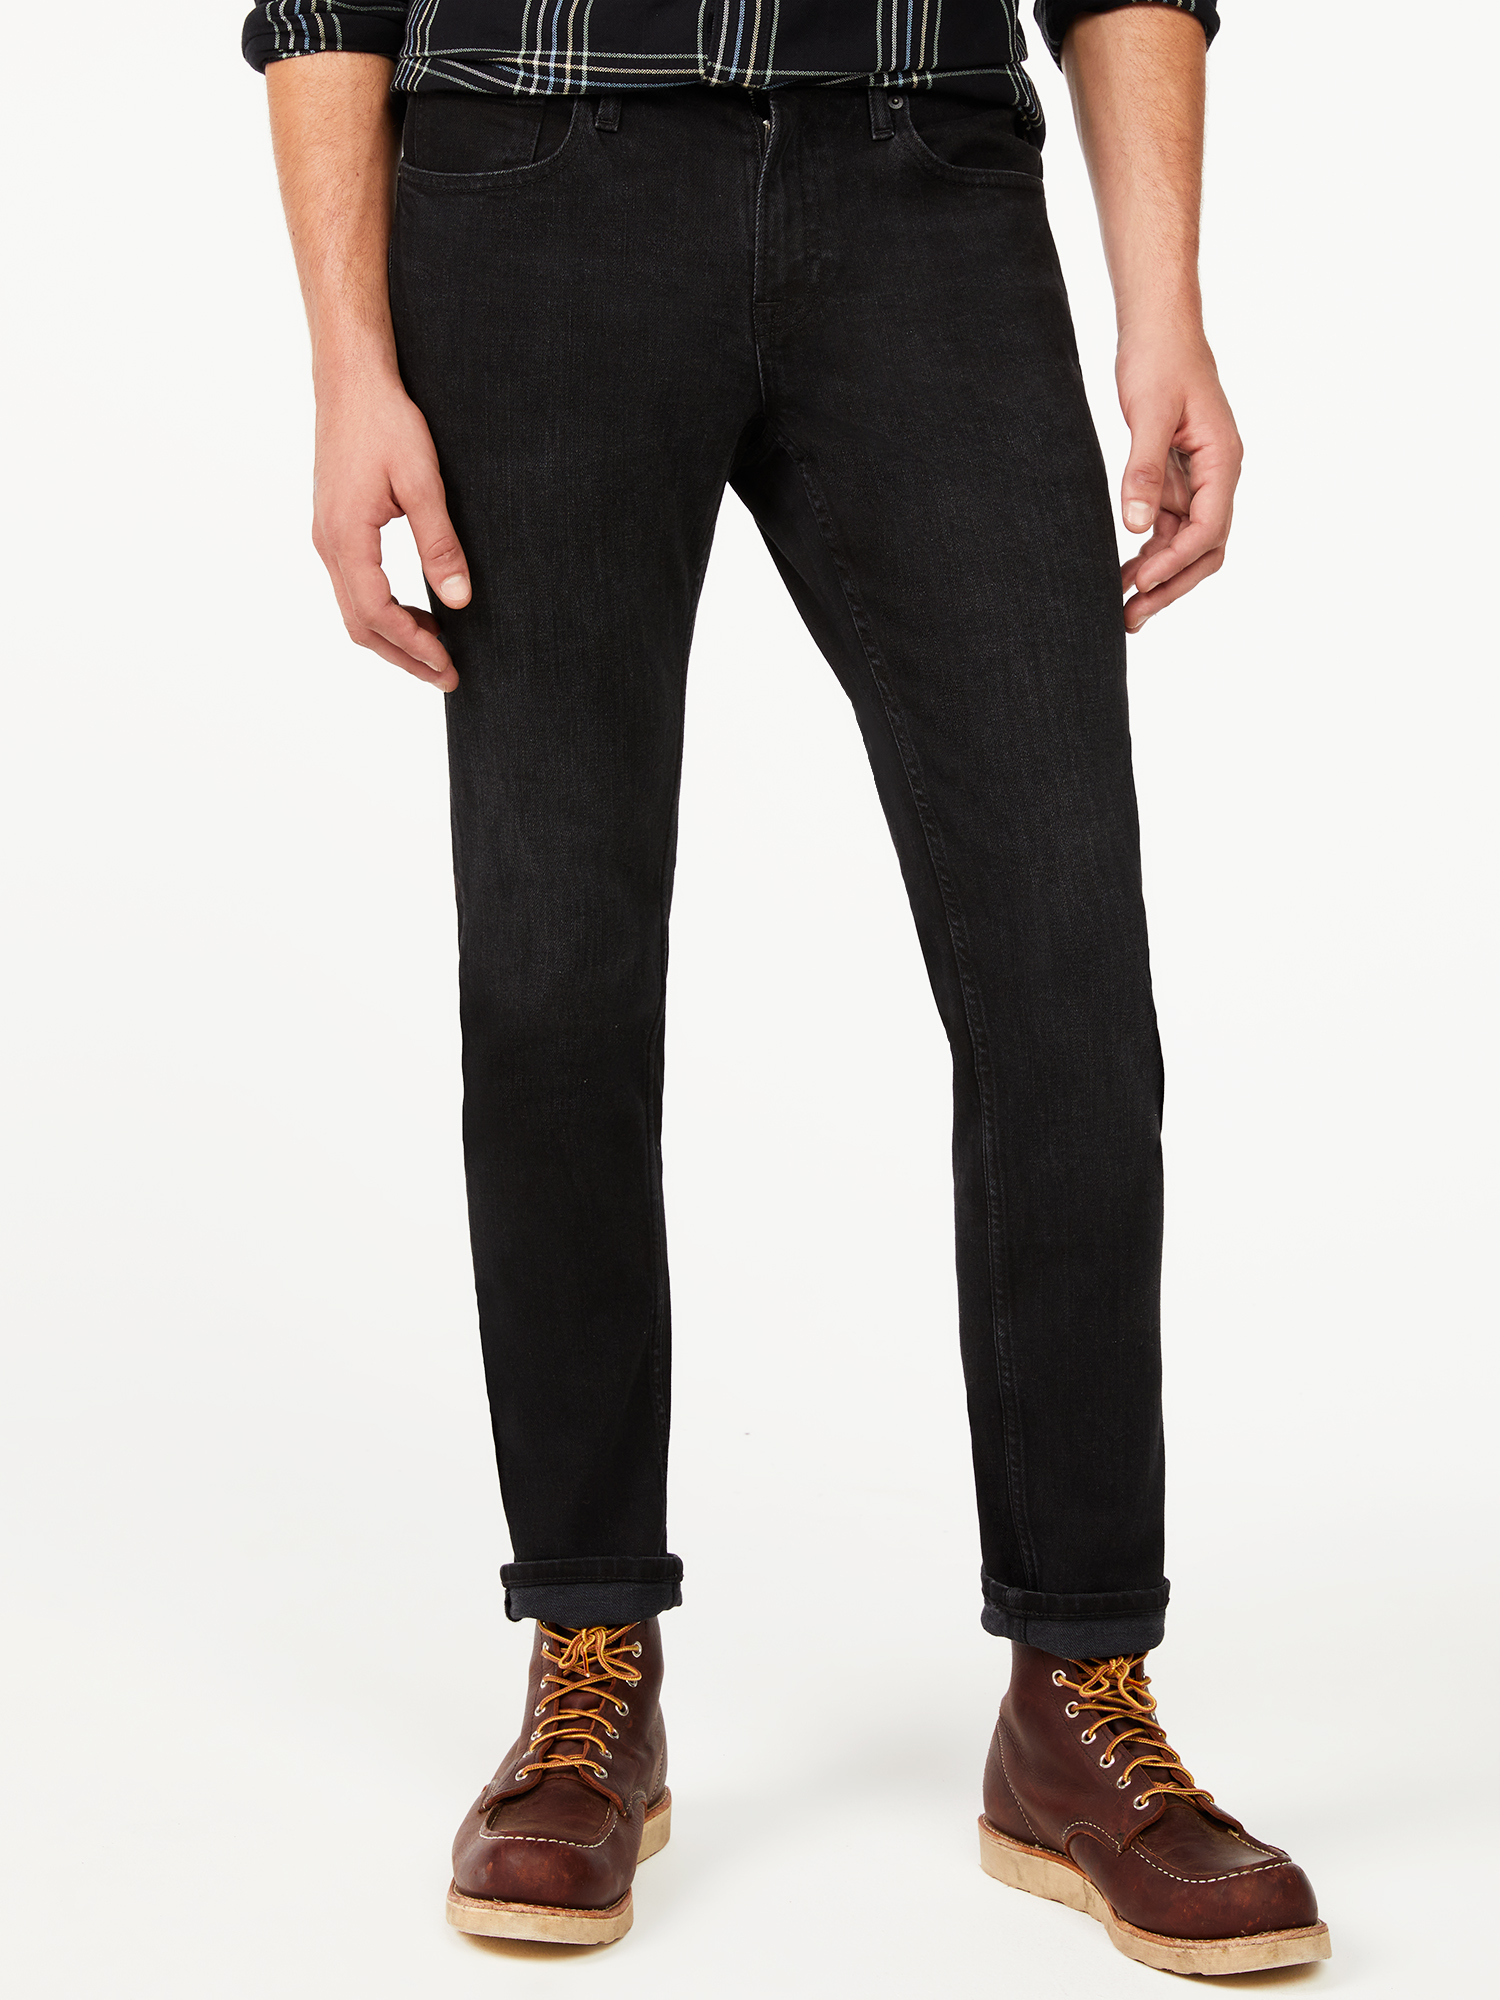 Free Assembly Men's Slim Fit Jeans - image 1 of 5